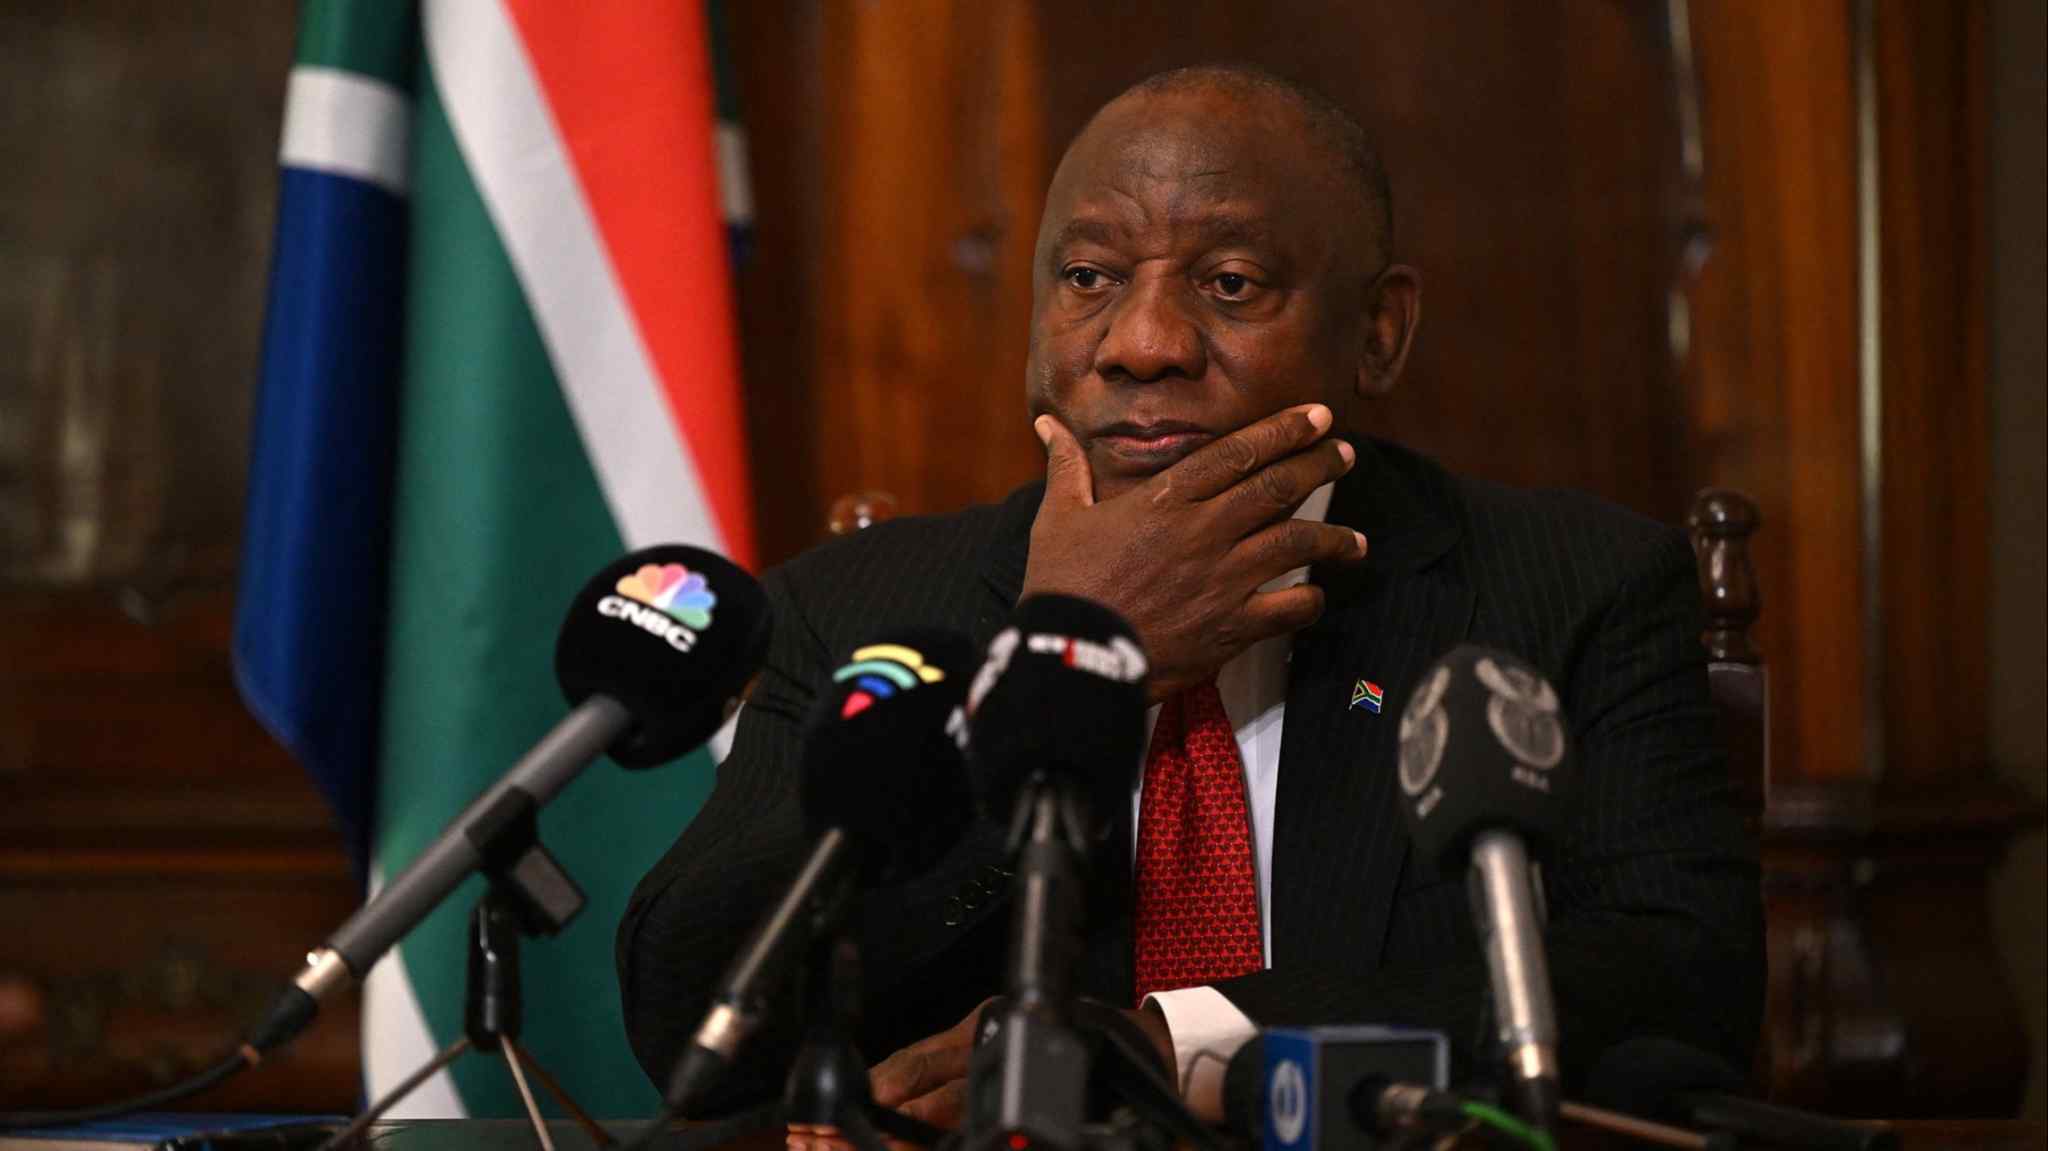 Ramaphosa’s presidency under threat after panel finds he ‘abused position’